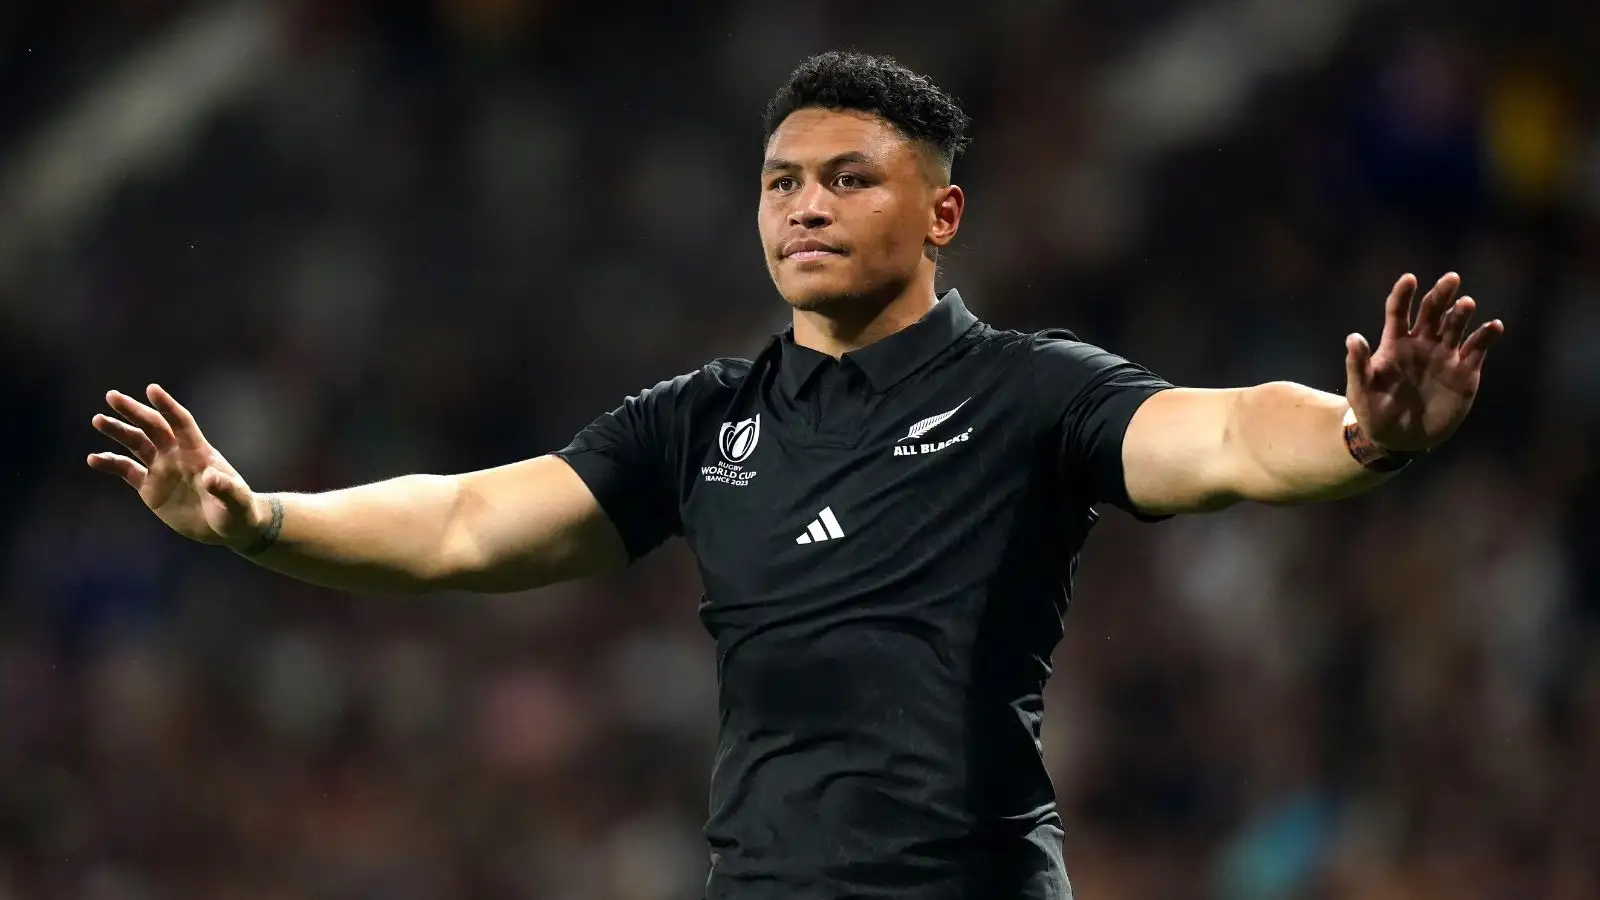 The All Blacks star who could be the latest rugby union player to cross codes to rugby league